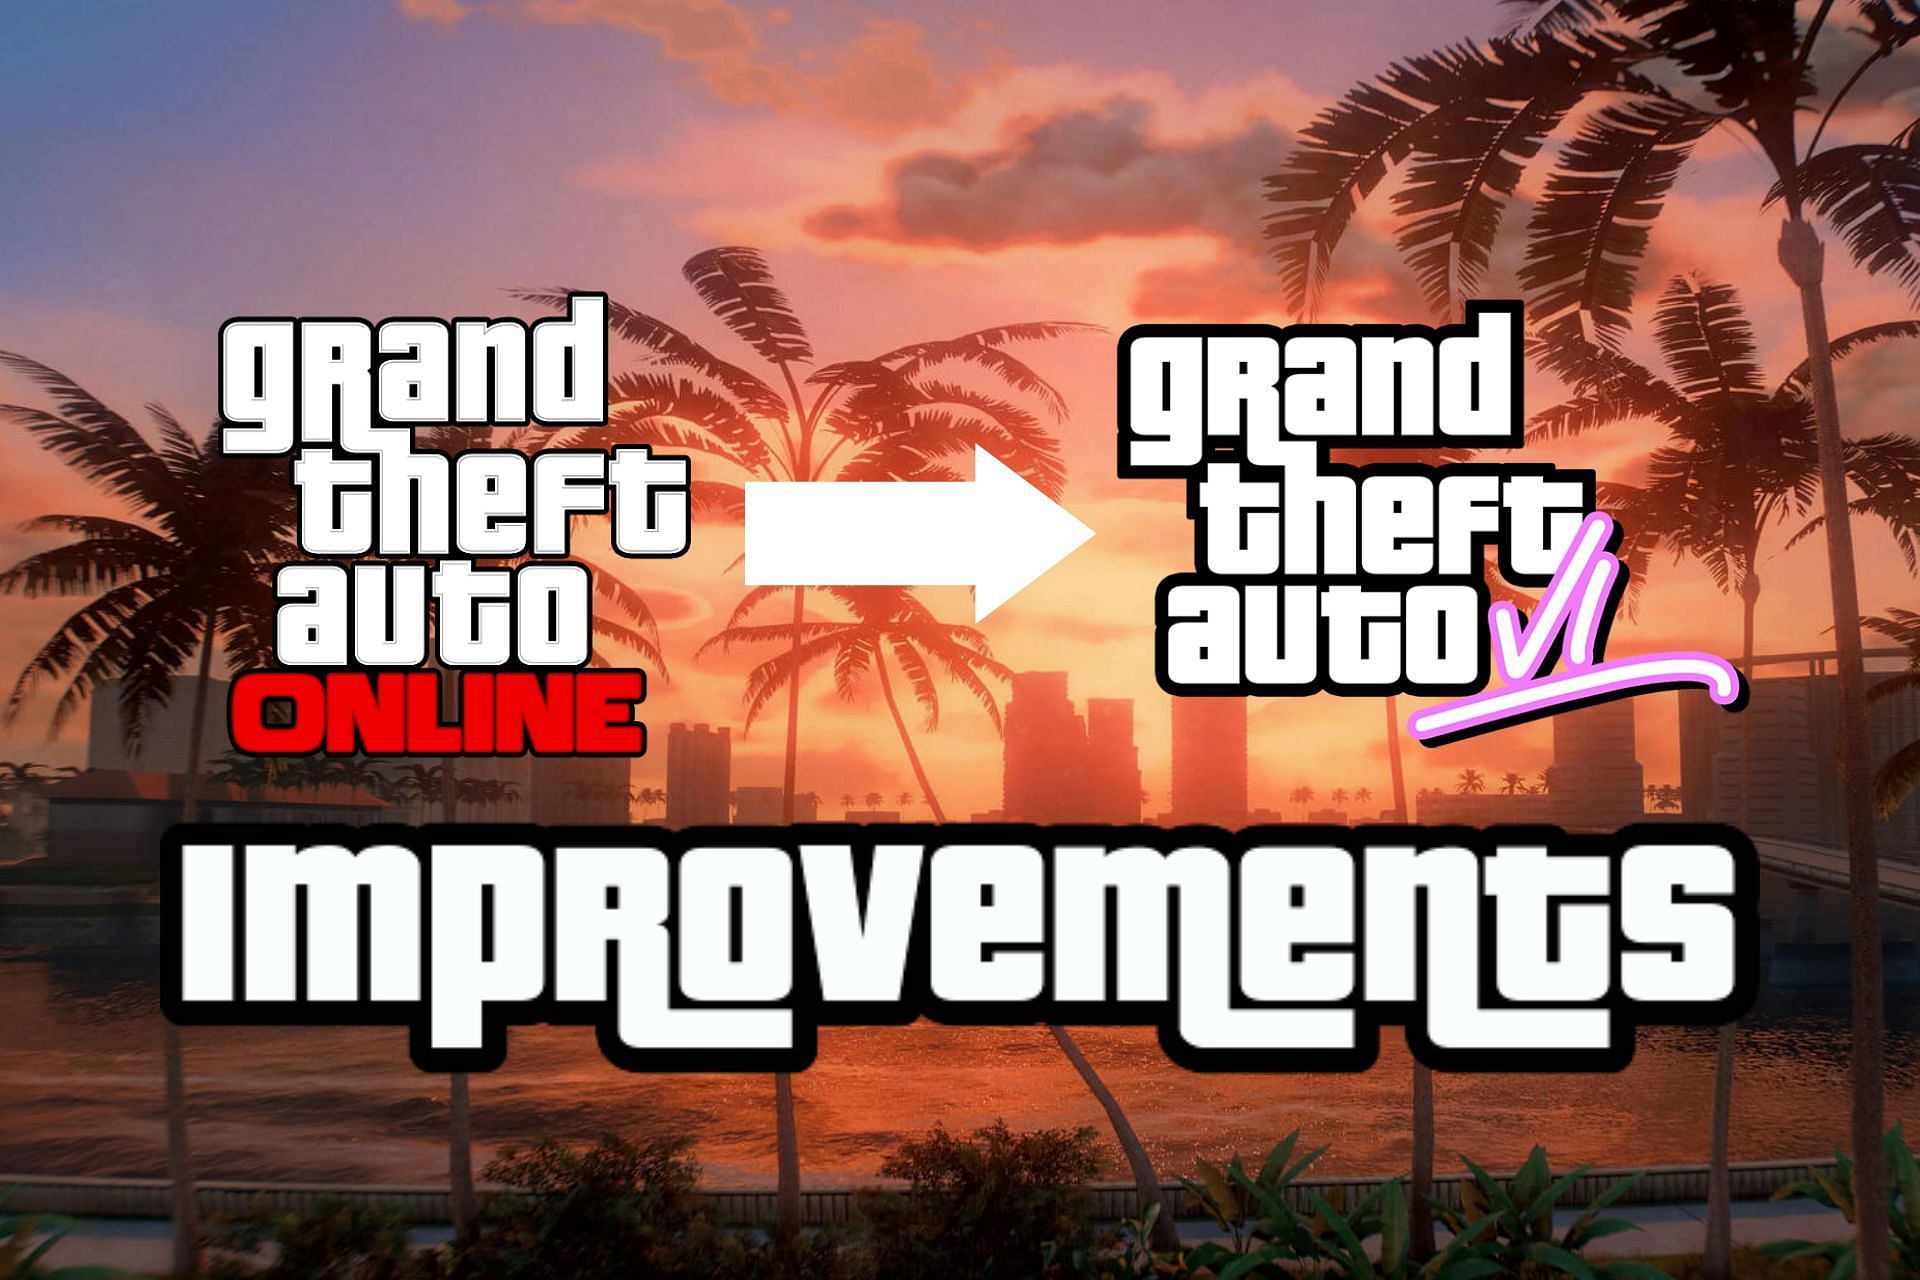 Why do people think that GTA online will end when GTA 6 gets released? I  think it will get updates until maintenance expense exceeds players playing  the game. Even when 6 gets